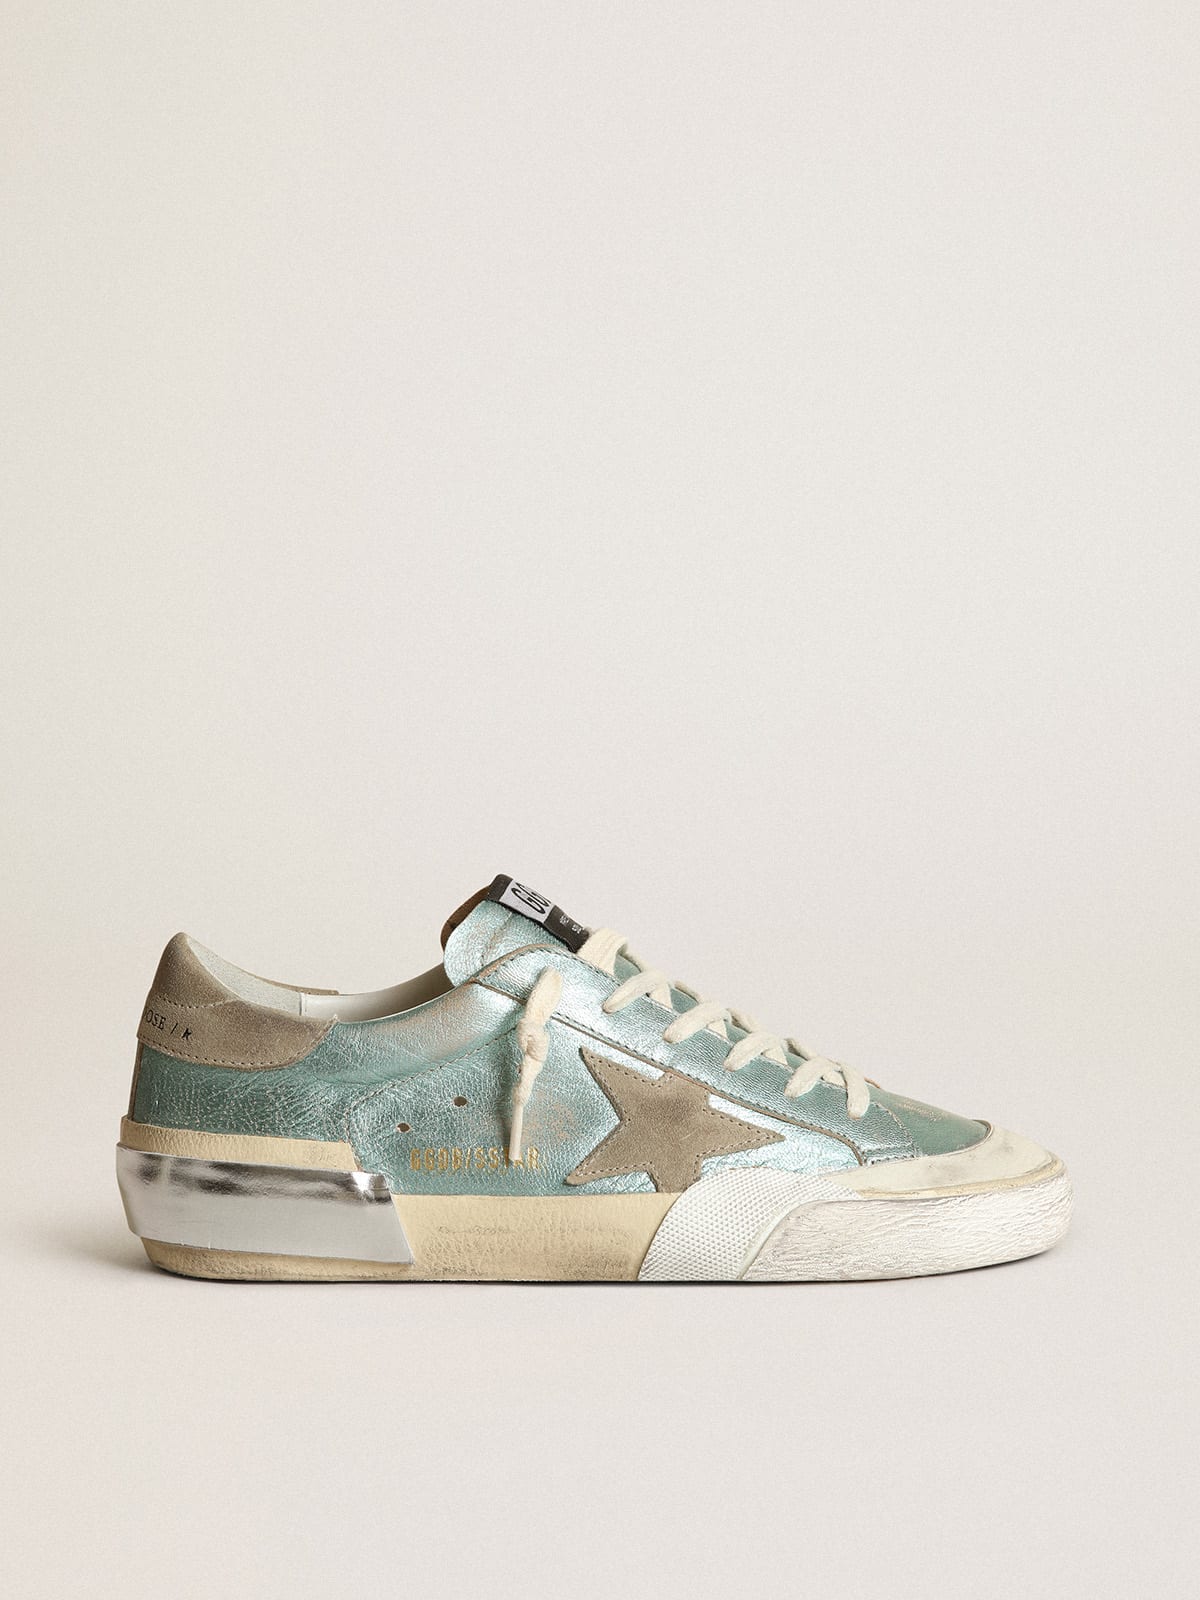 Super-Star sneakers in mint-green laminated leather with ice-gray suede star and multi-foxing